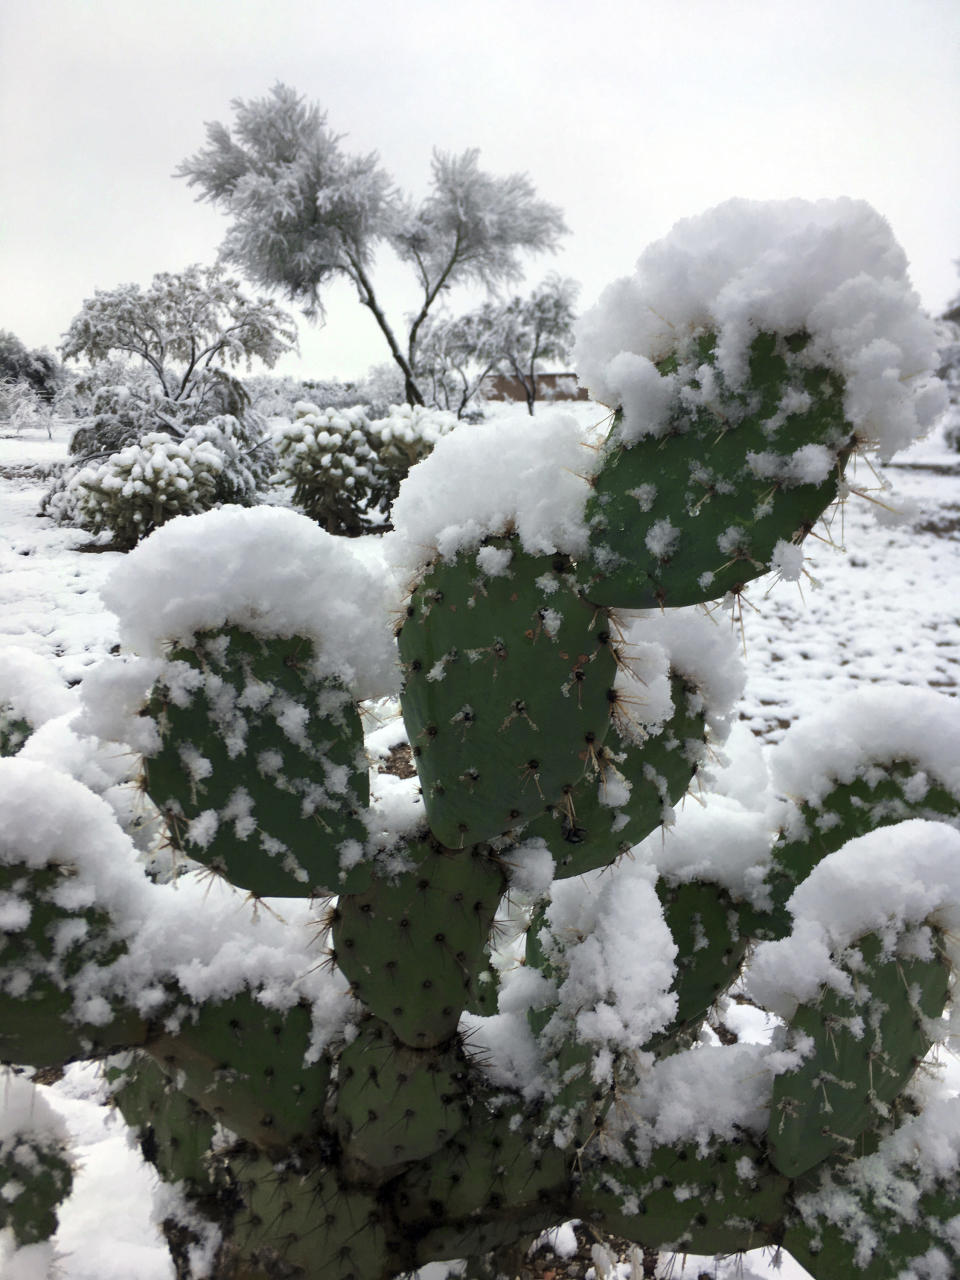 Snow partially covers a cactus outside of Tucson near Vail, Ariz., Wednesday, Jan. 2, 2018. Southern Arizona and other parts of the Southwest are seeing unusually cold temperatures as a winter storm moves through the region. (Jessica Howard via AP)